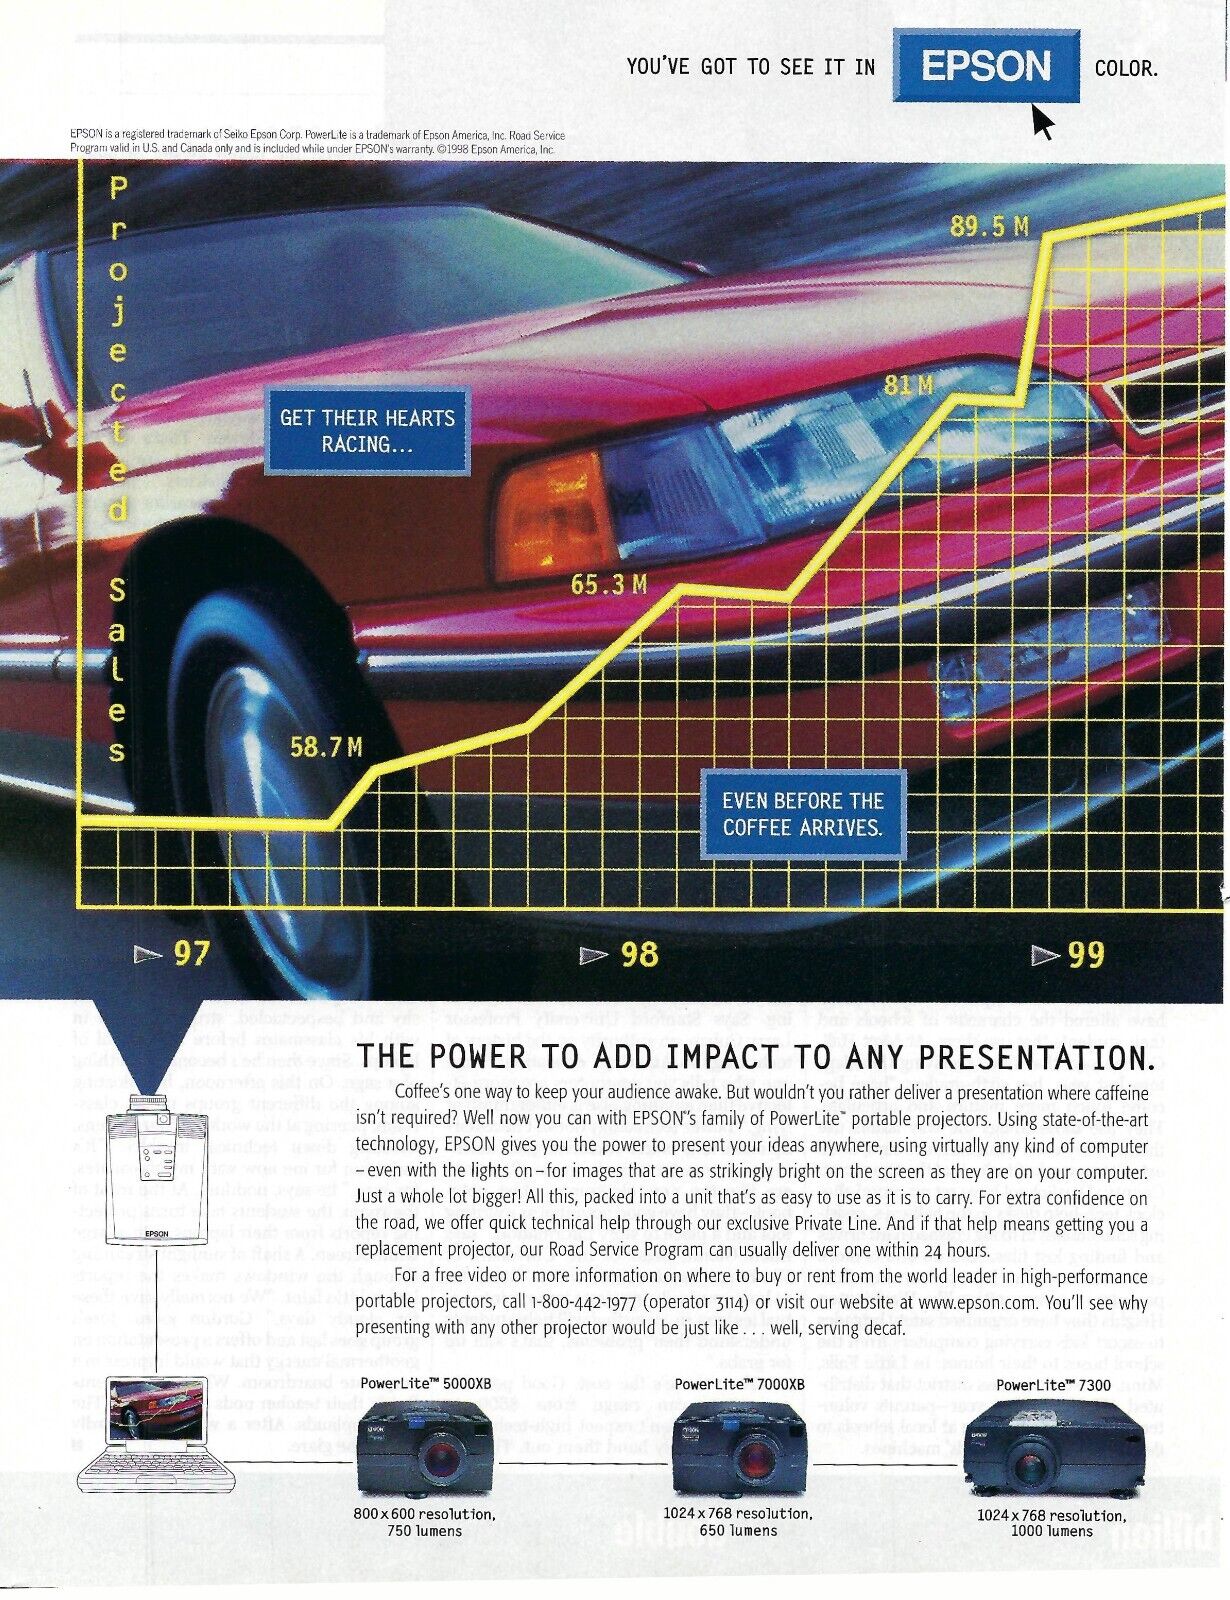 1998 Epson Digital Projector Powerlite Print Ad/Poster from Vintage Magazine